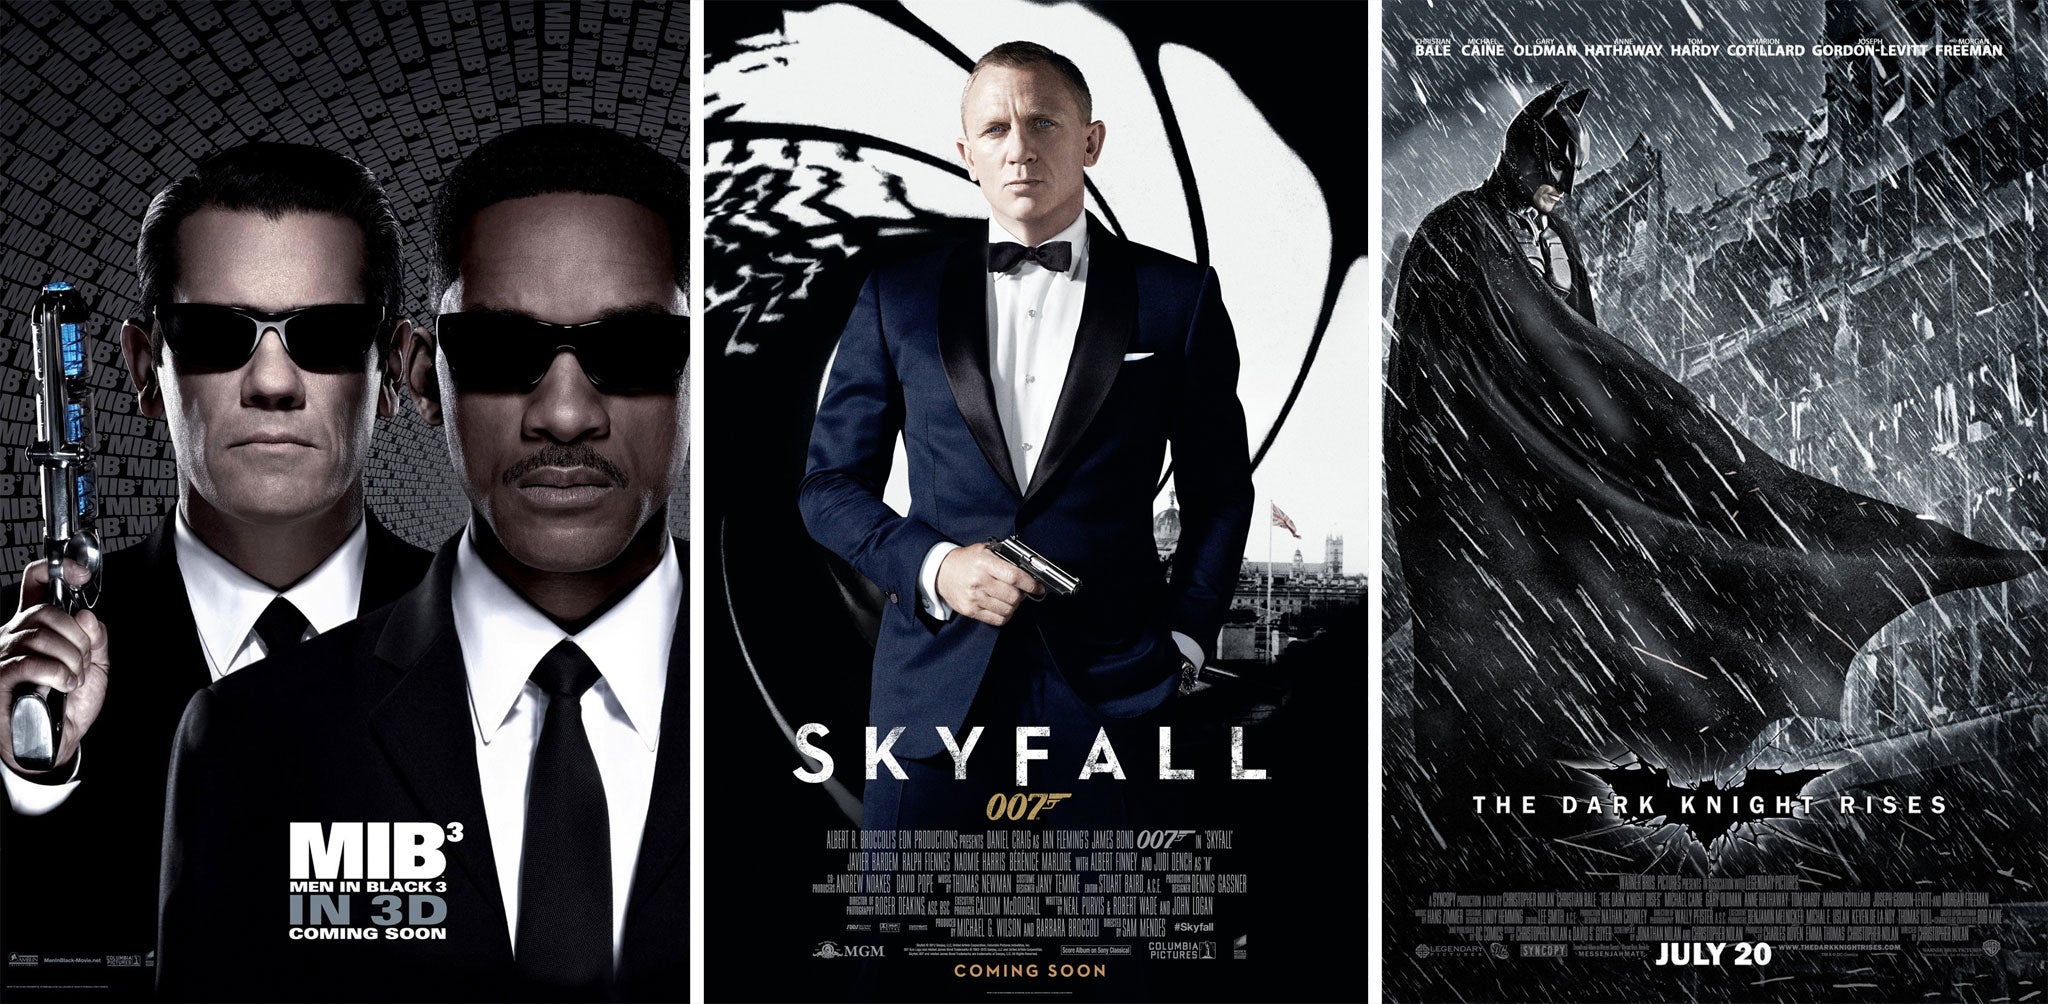 Spot the gaffes? Men In Black III, Skyfall and The Dark Knight Rises